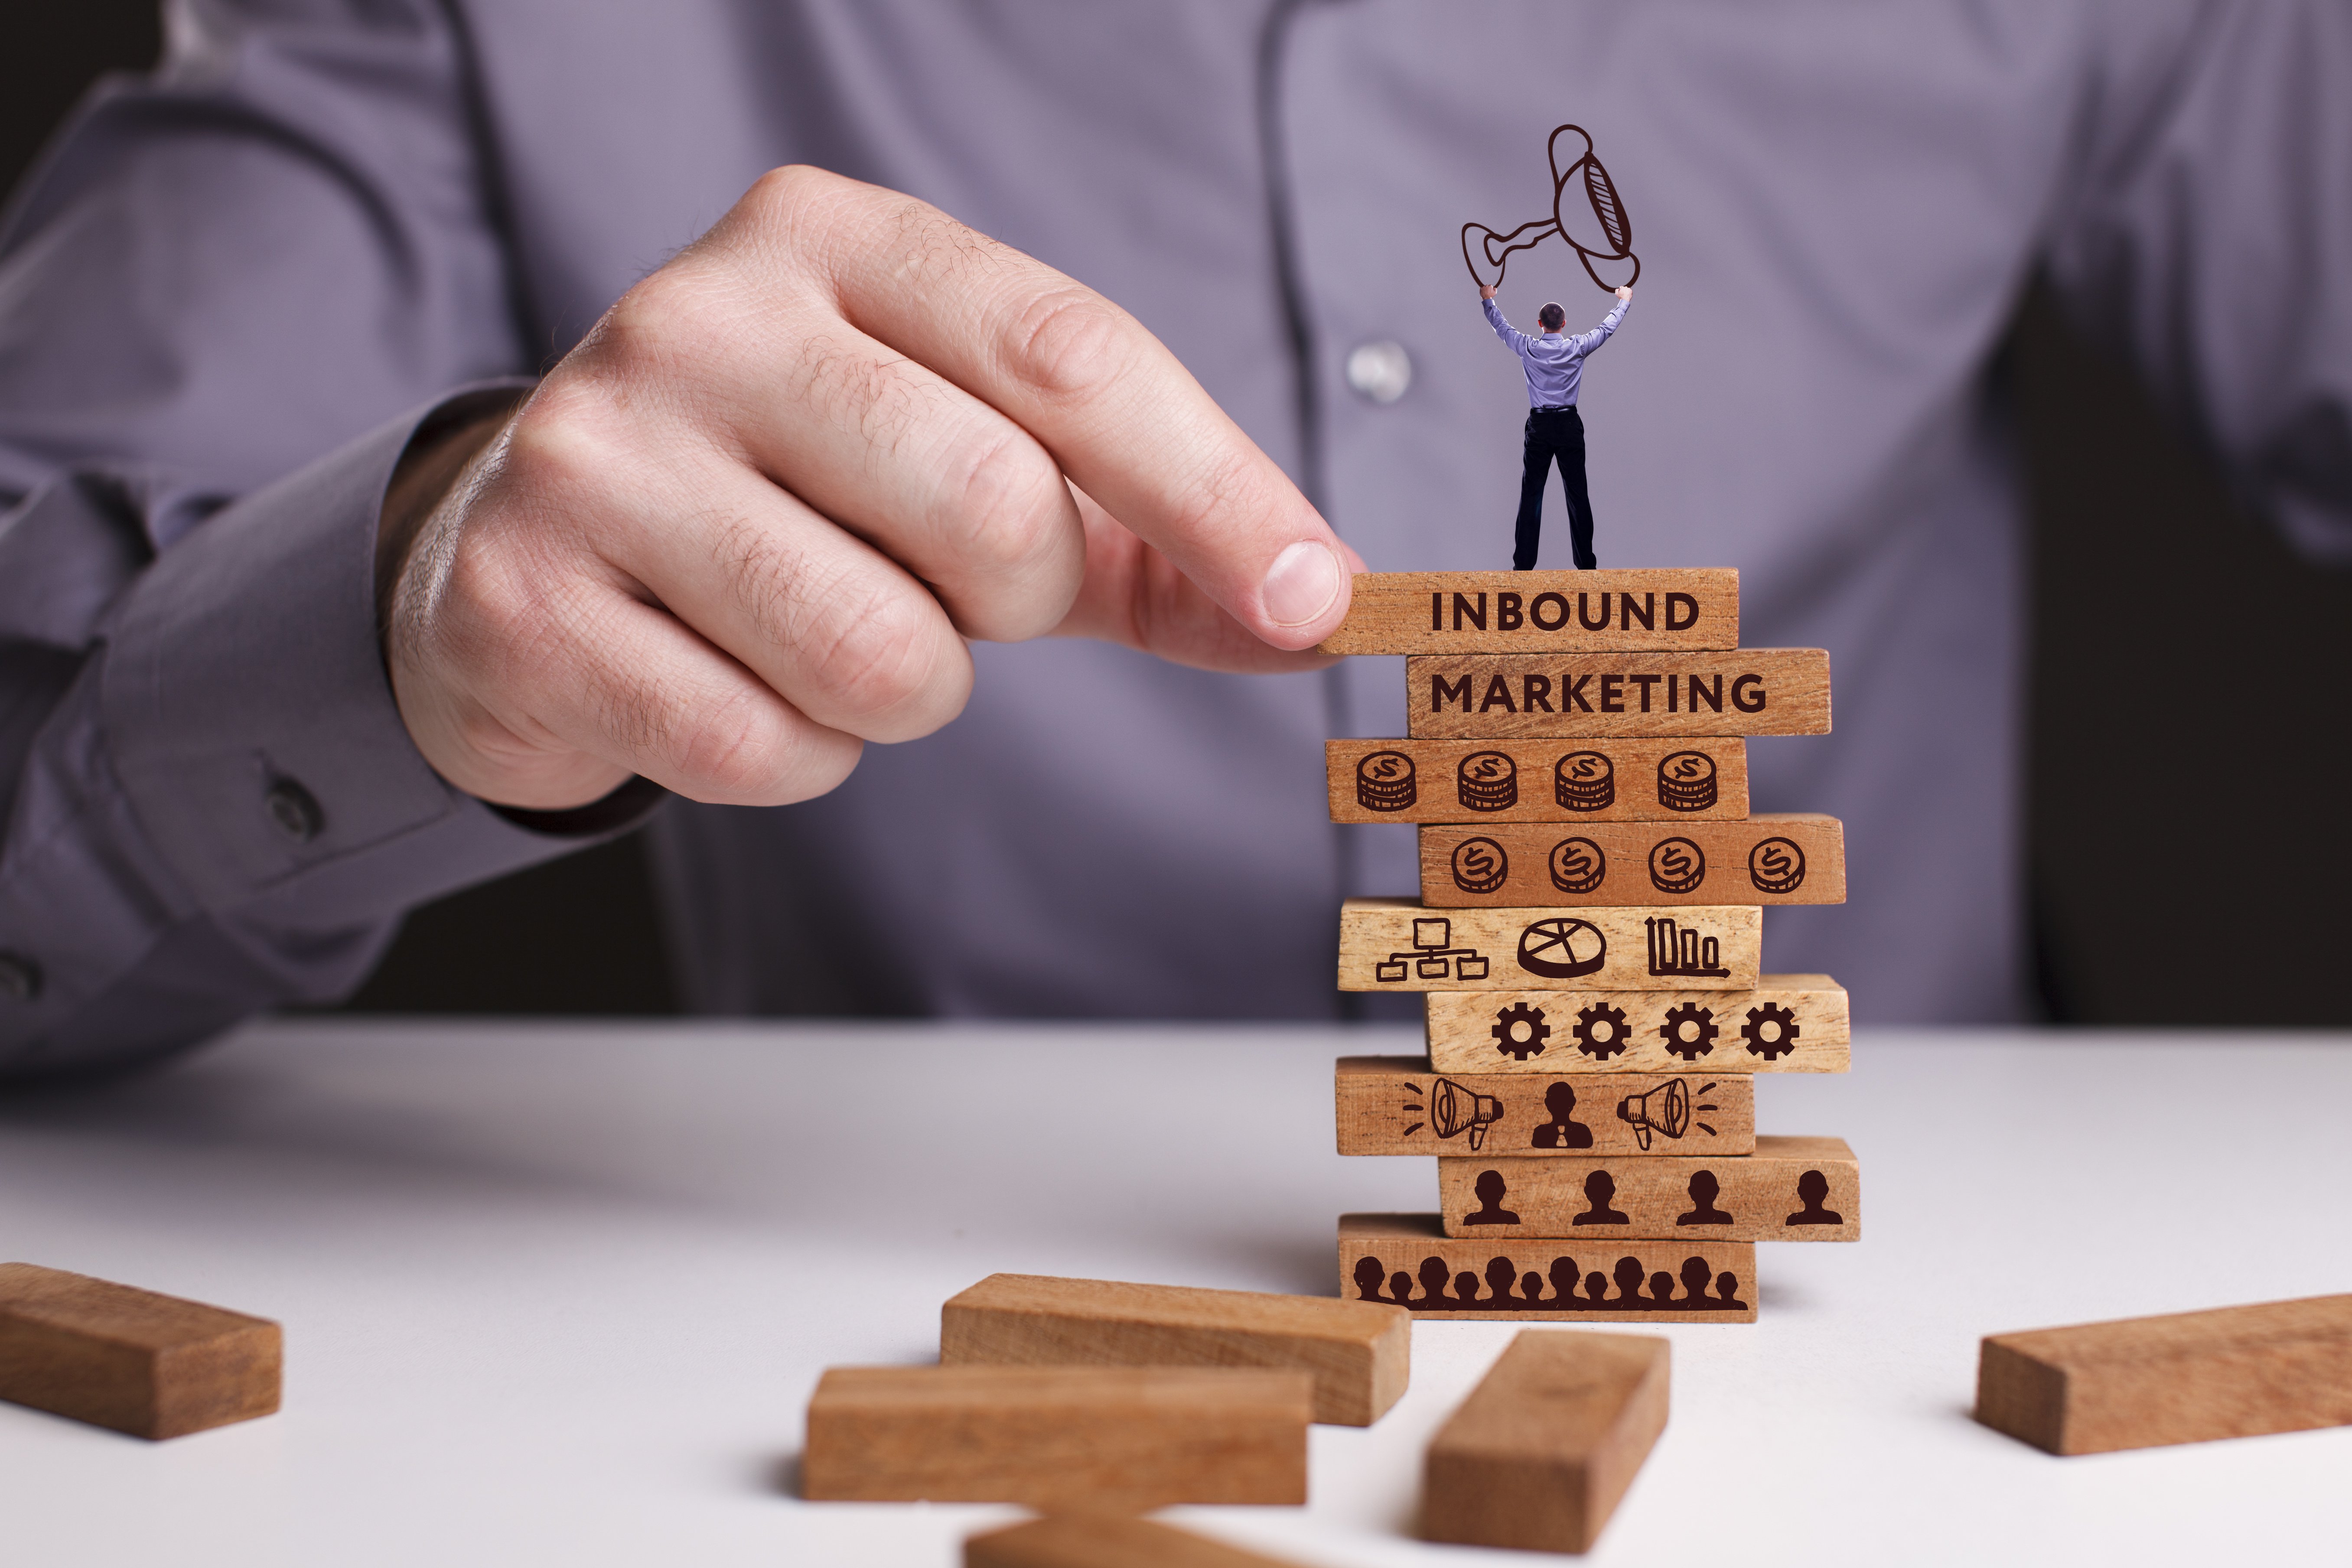 5 Techniques Inbound Marketing Uses For Lead Generation featured image